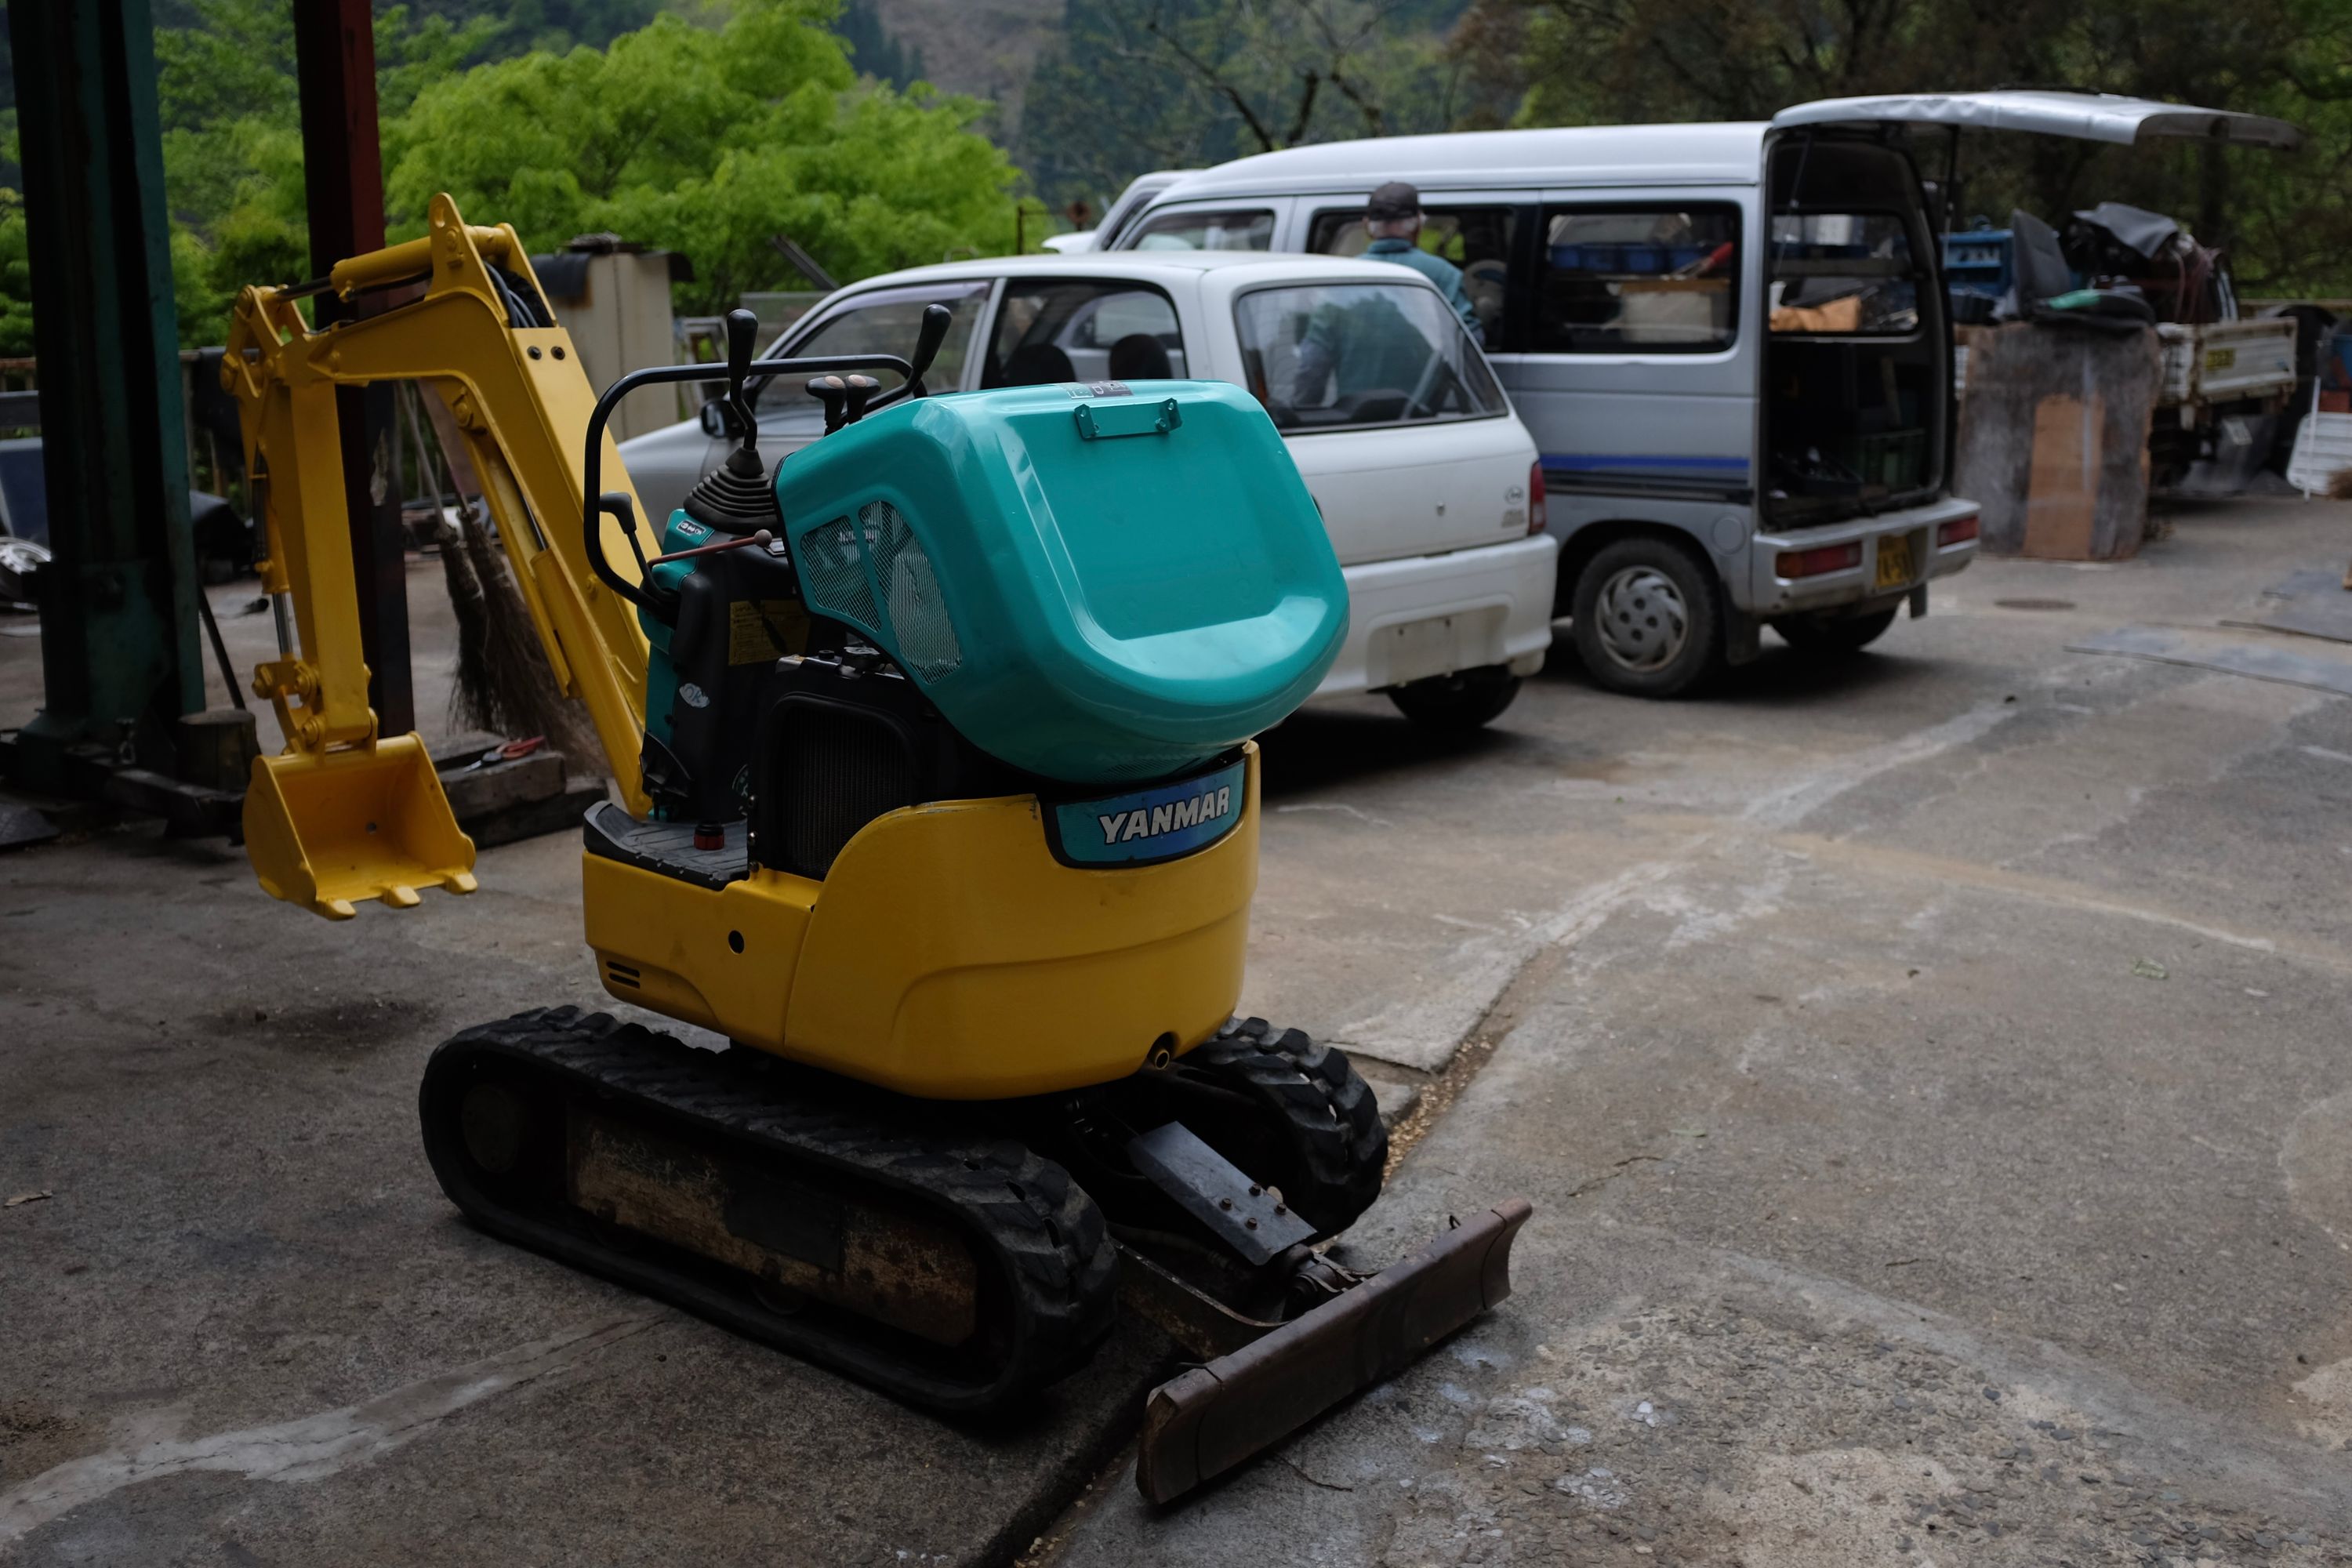 A tiny yellow excavator in a parking lot.